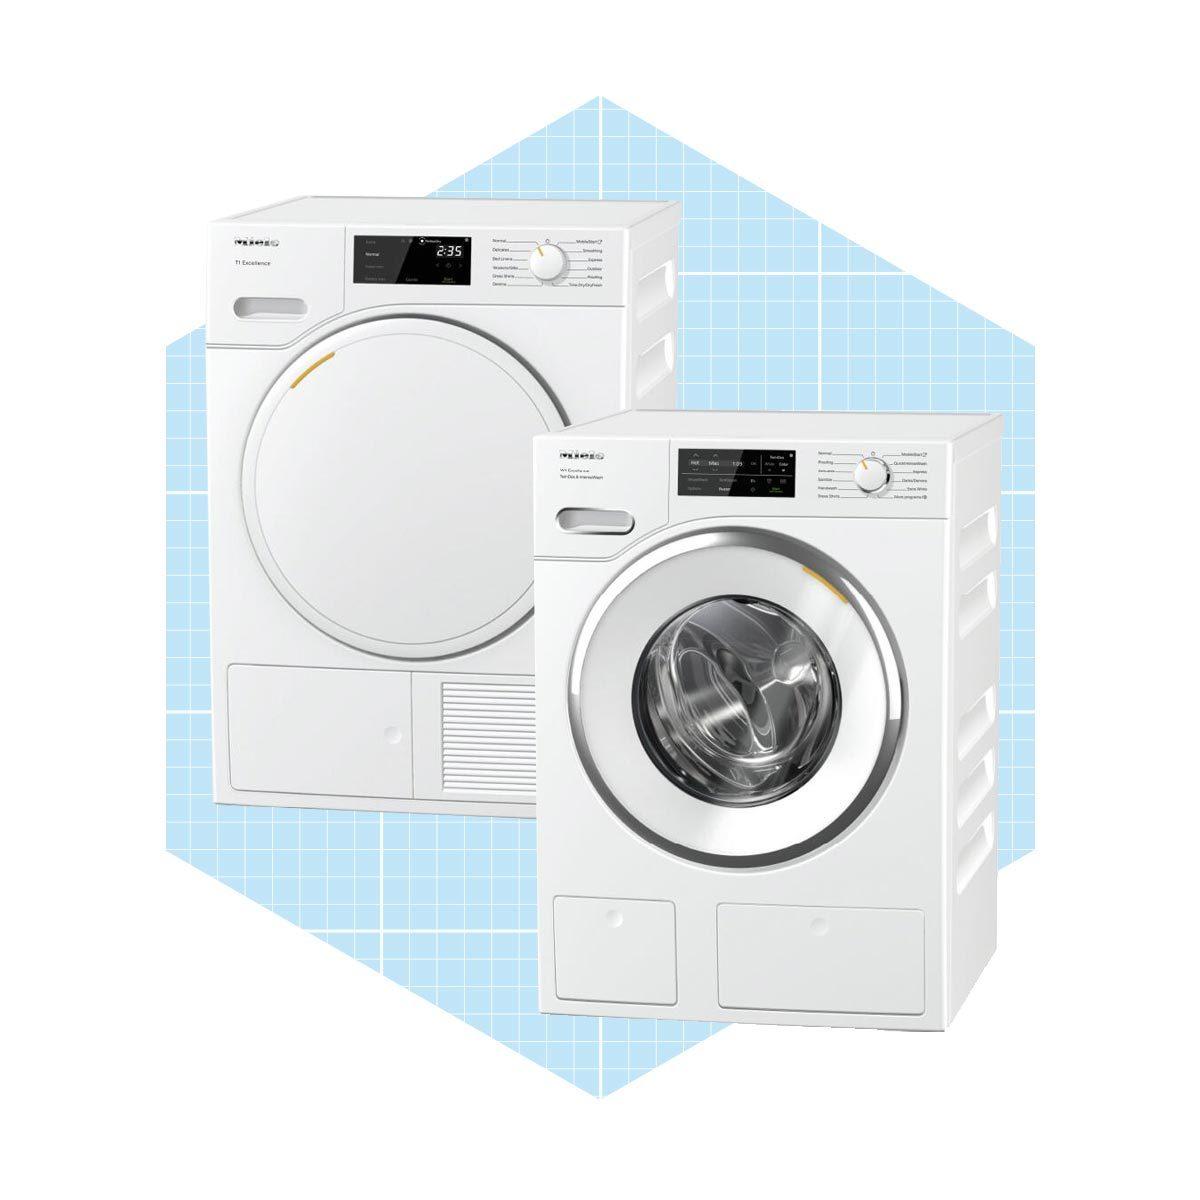 Choosing the Best Apartment-Sized Washer and Dryer